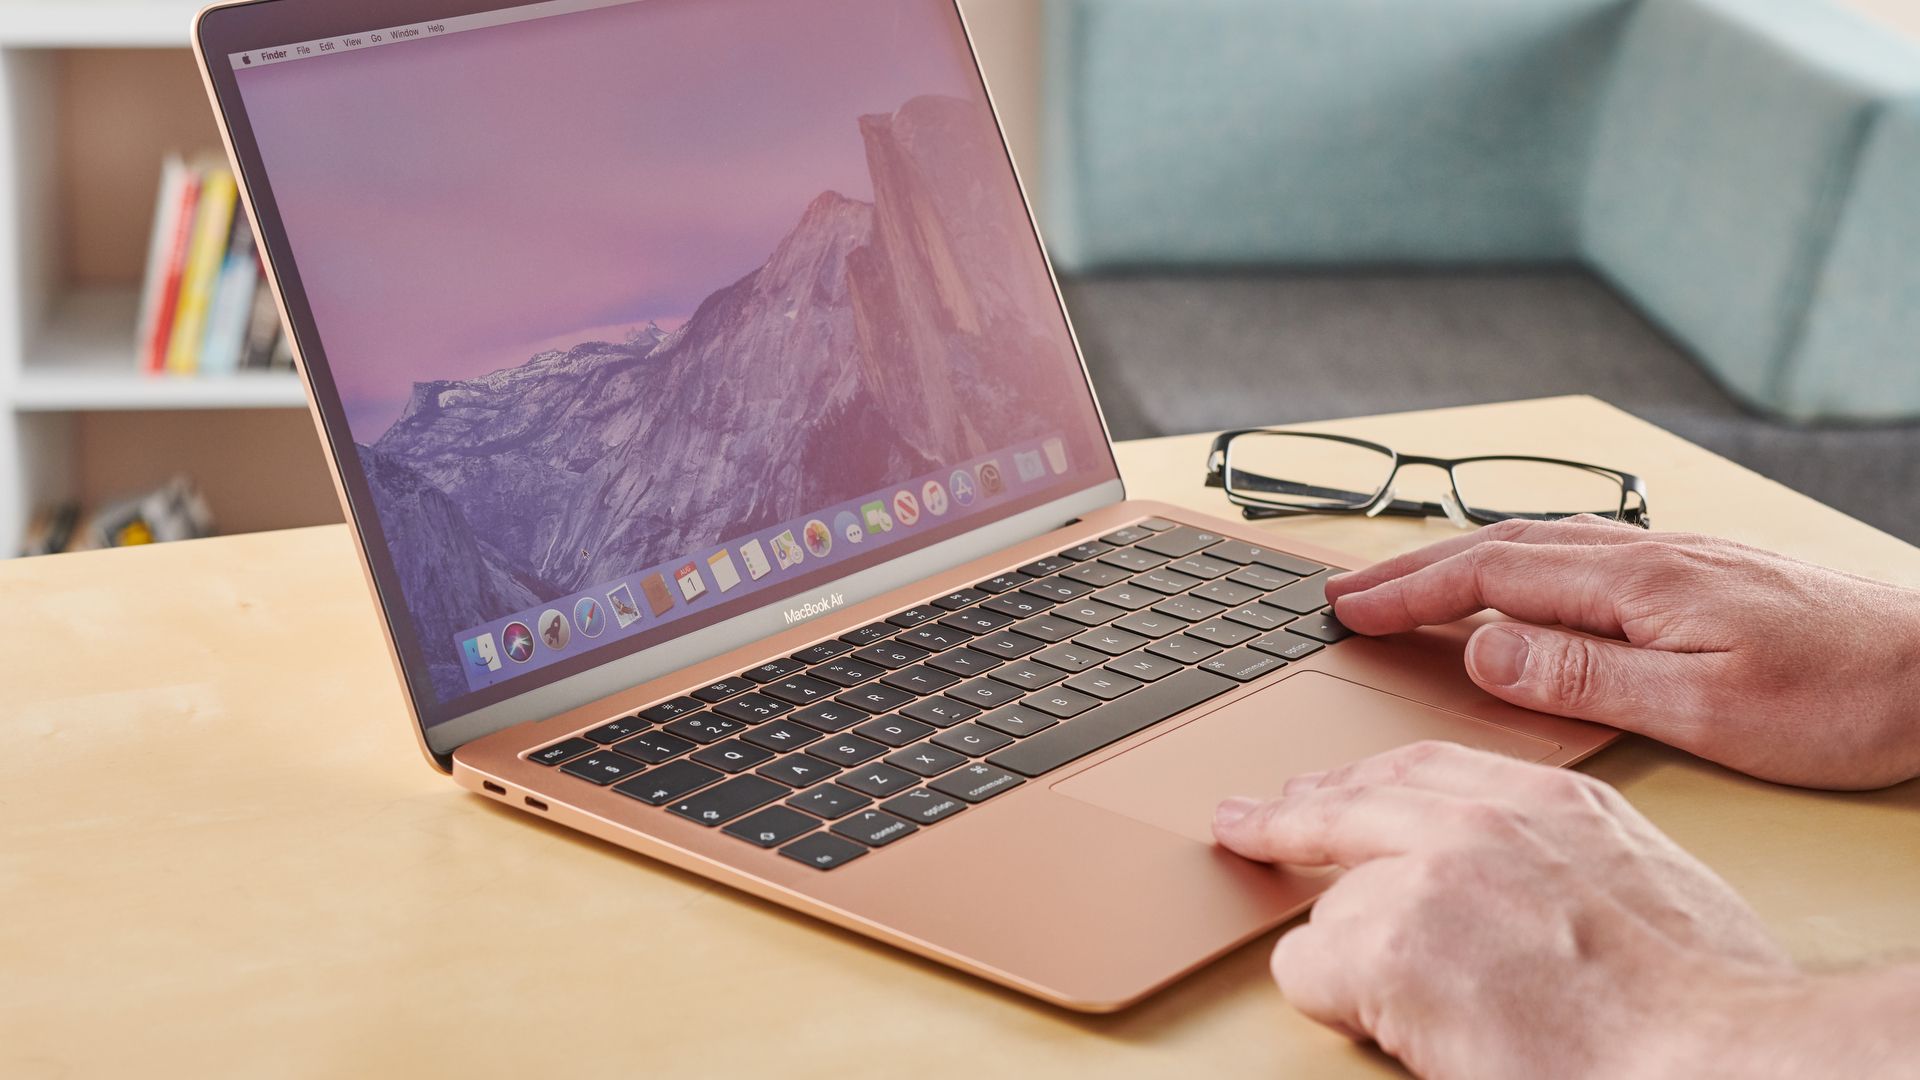 New Apple Macbook Air Refresh Could Finally Add 10th Gen Intel Cpus Later In 2019 Techradar 